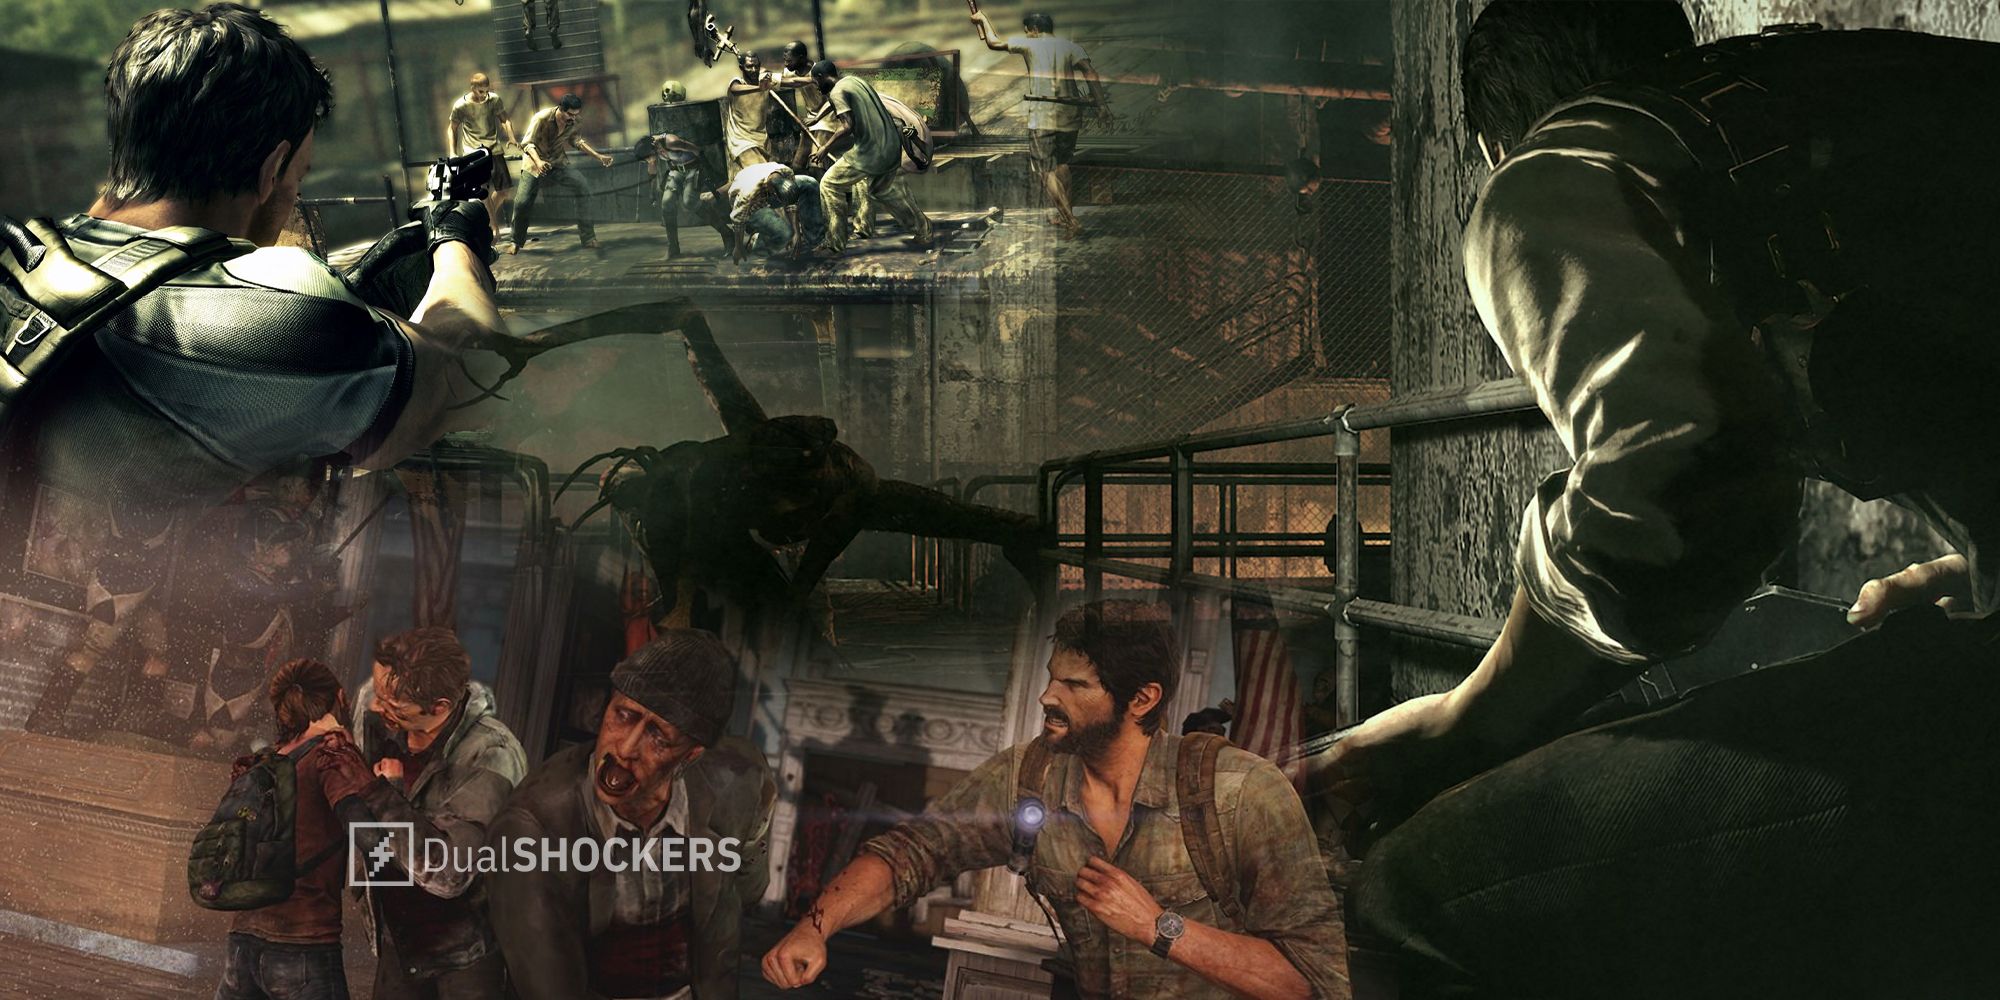 PlayStation 3 Resident Evil 5, The Evil Within, The Last of Us gameplay